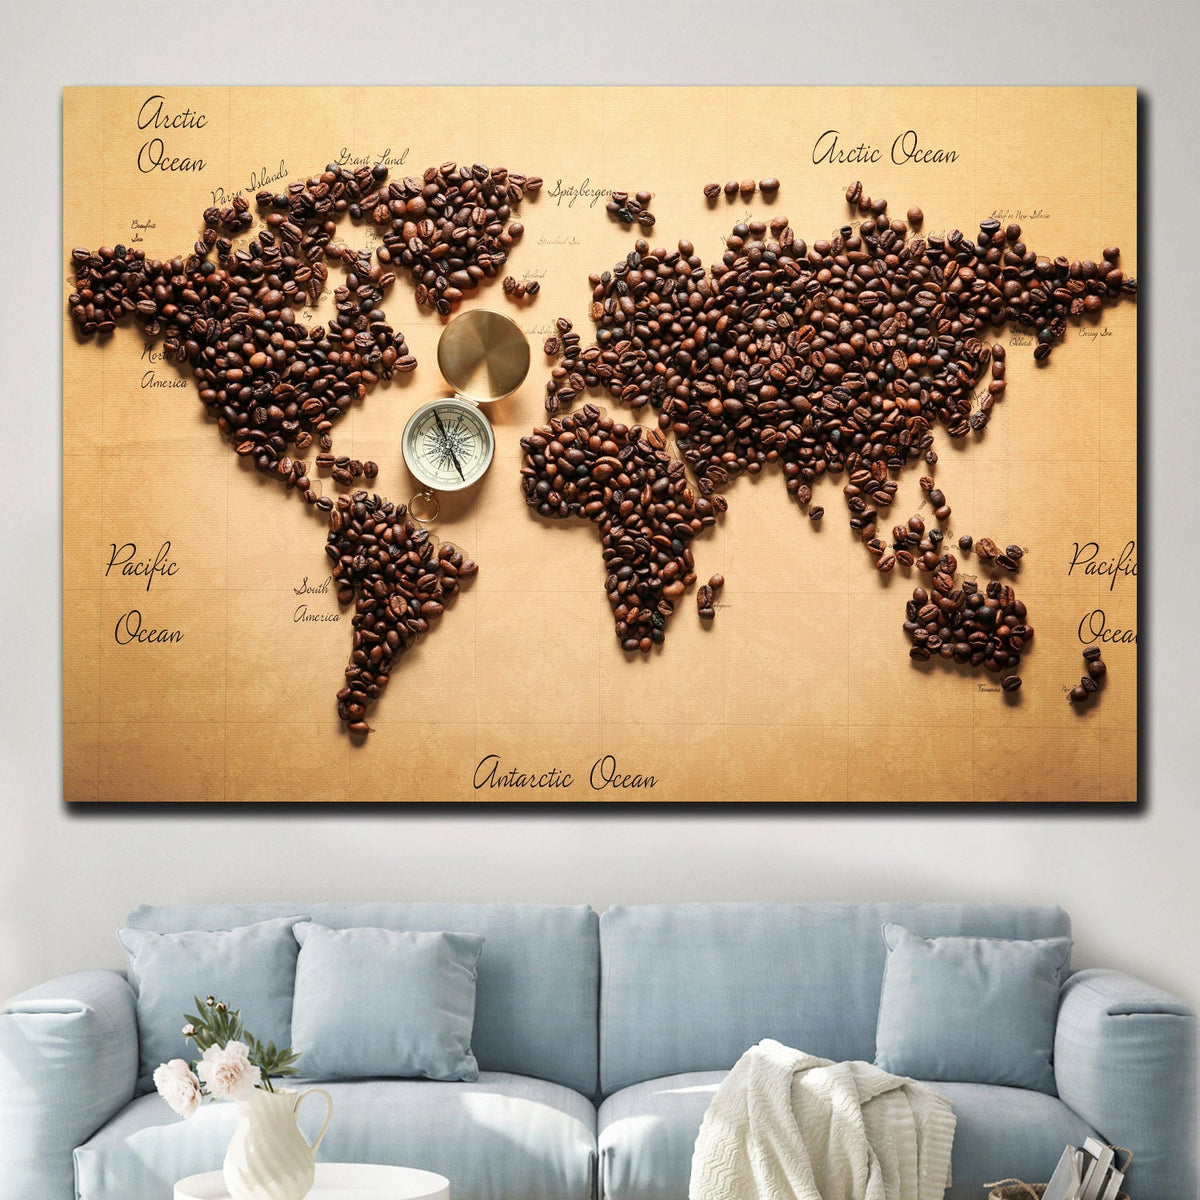 https://cdn.shopify.com/s/files/1/0387/9986/8044/products/WorldMapwithCoffeeBeansCanvasArtprintStretched-3.jpg